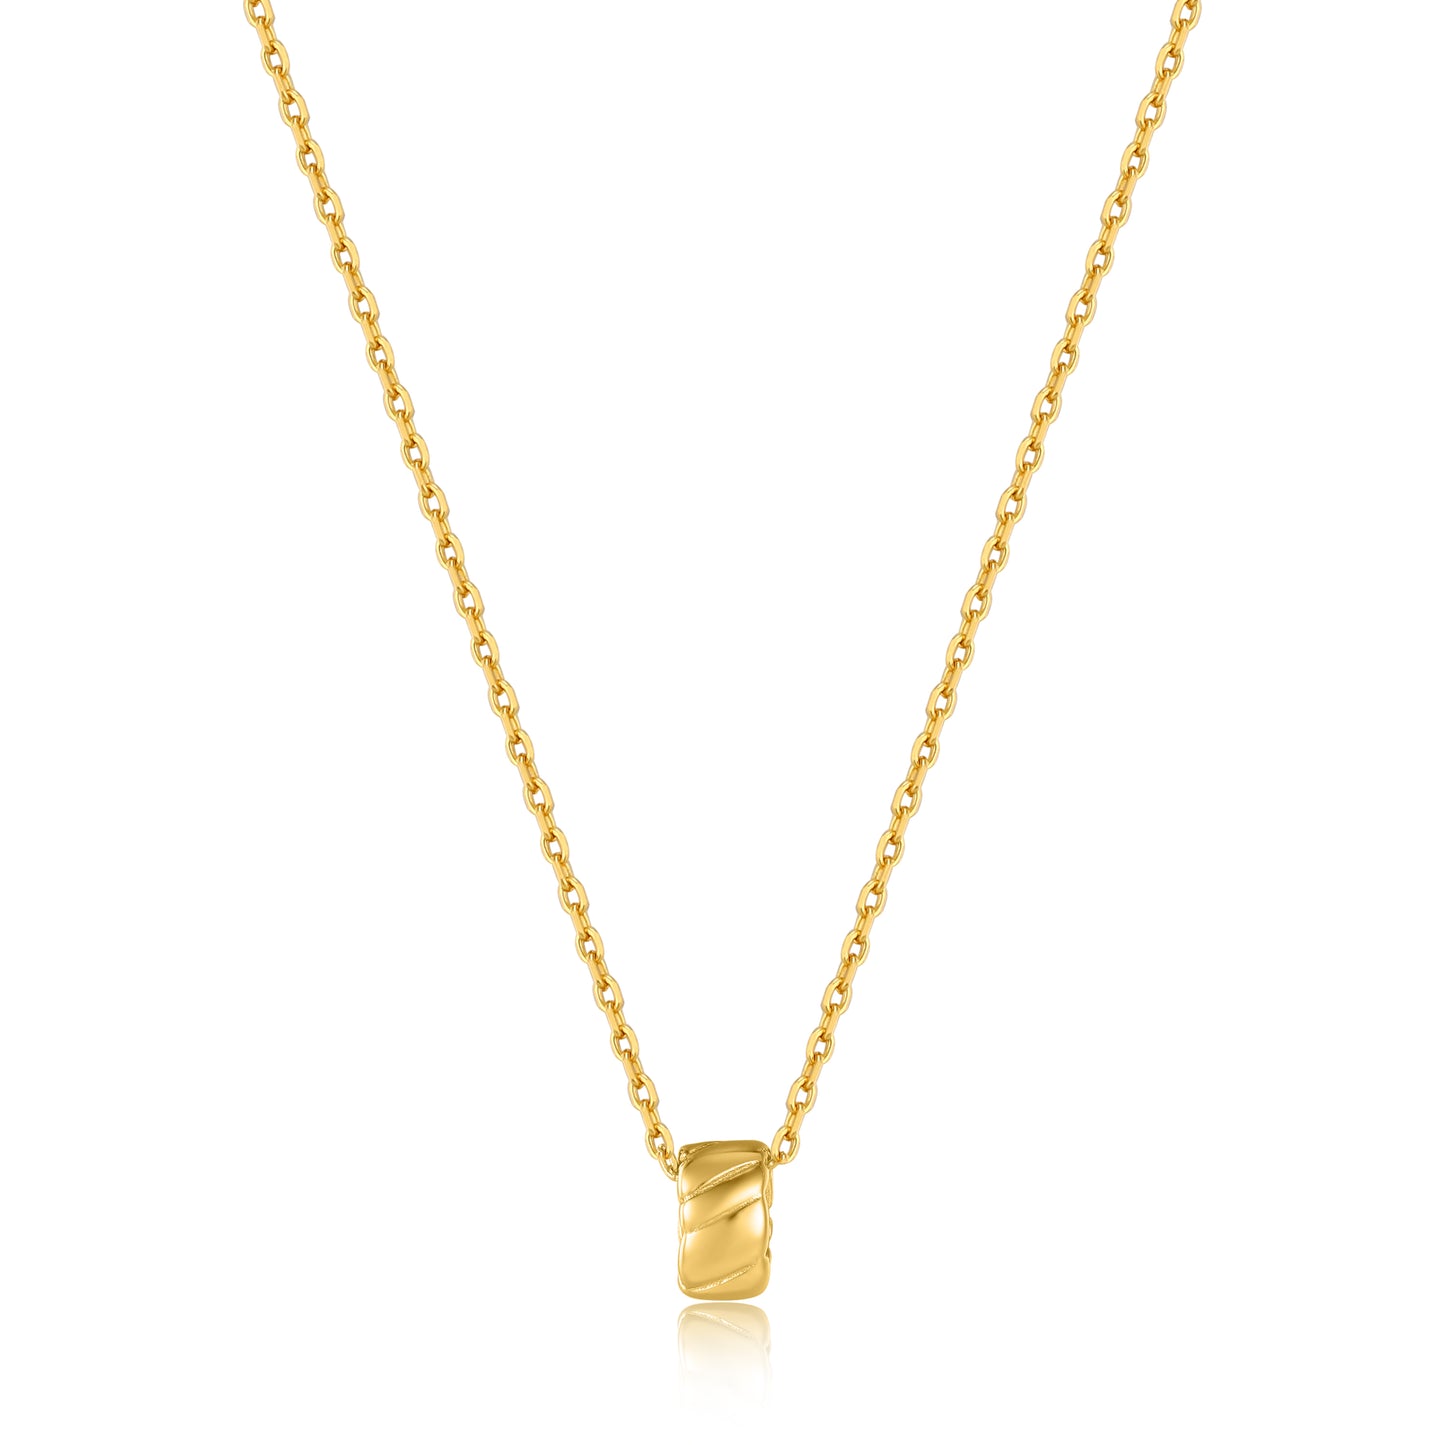 Ania Haie Gold Smooth Twist Pendant Necklace - Silver Necklace